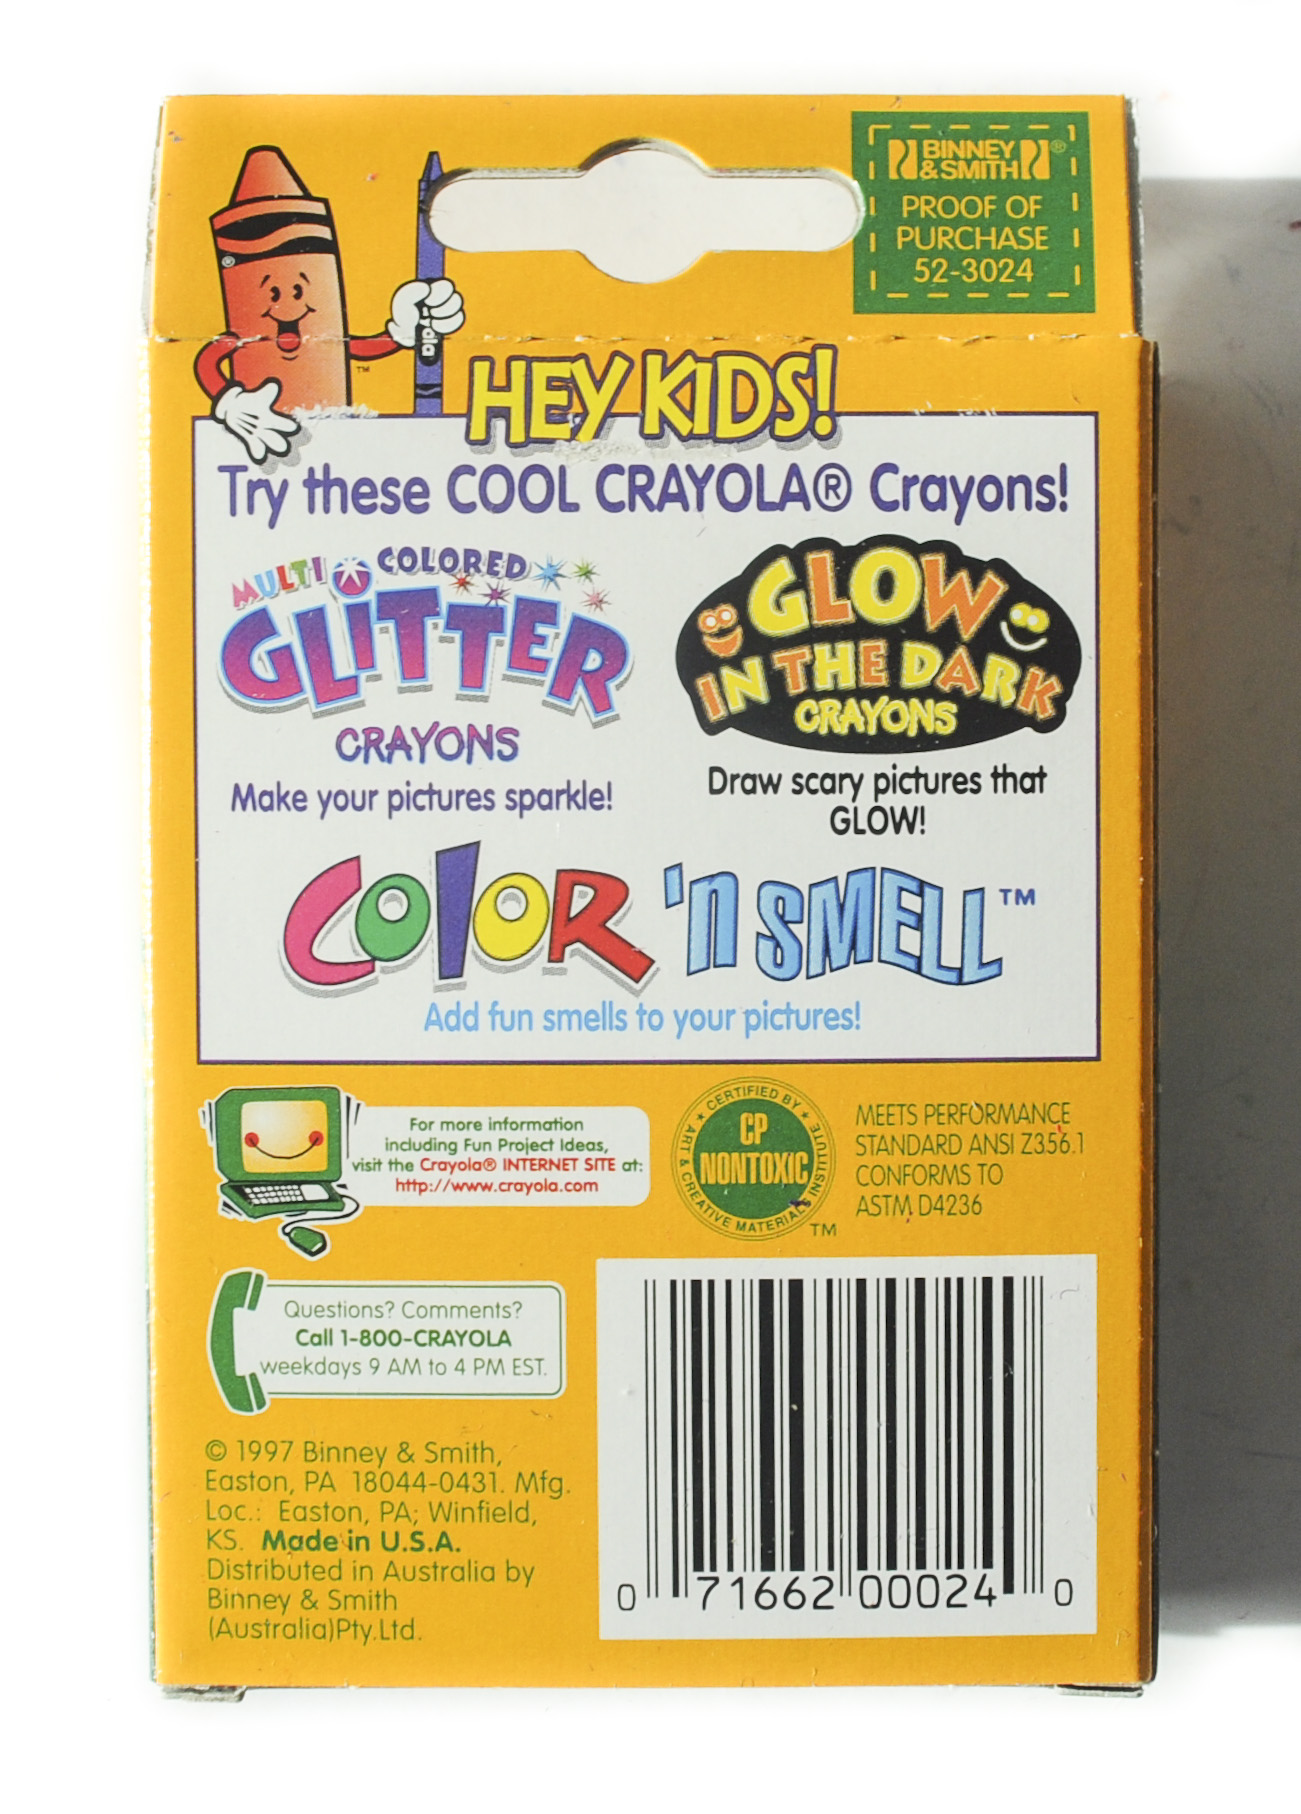 Crayola Expands Colors of the World Collection to Over 40 Skin Tones -  Tinybeans